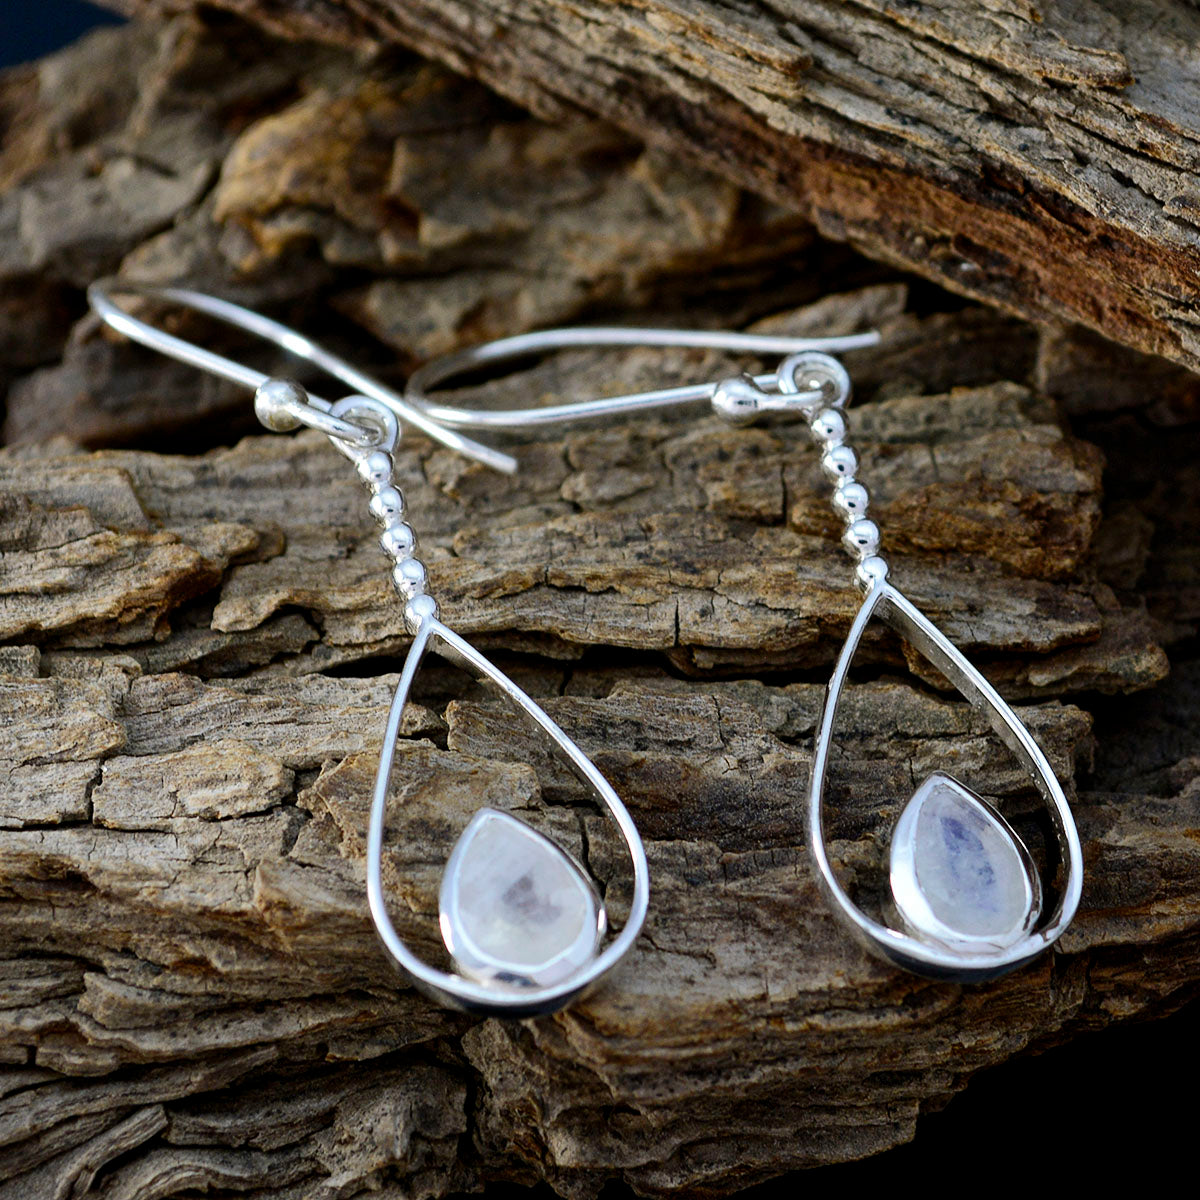 Riyo Good Gemstones Pear Faceted White Rainbow Moonstone Silver Earrings gift for boxing day